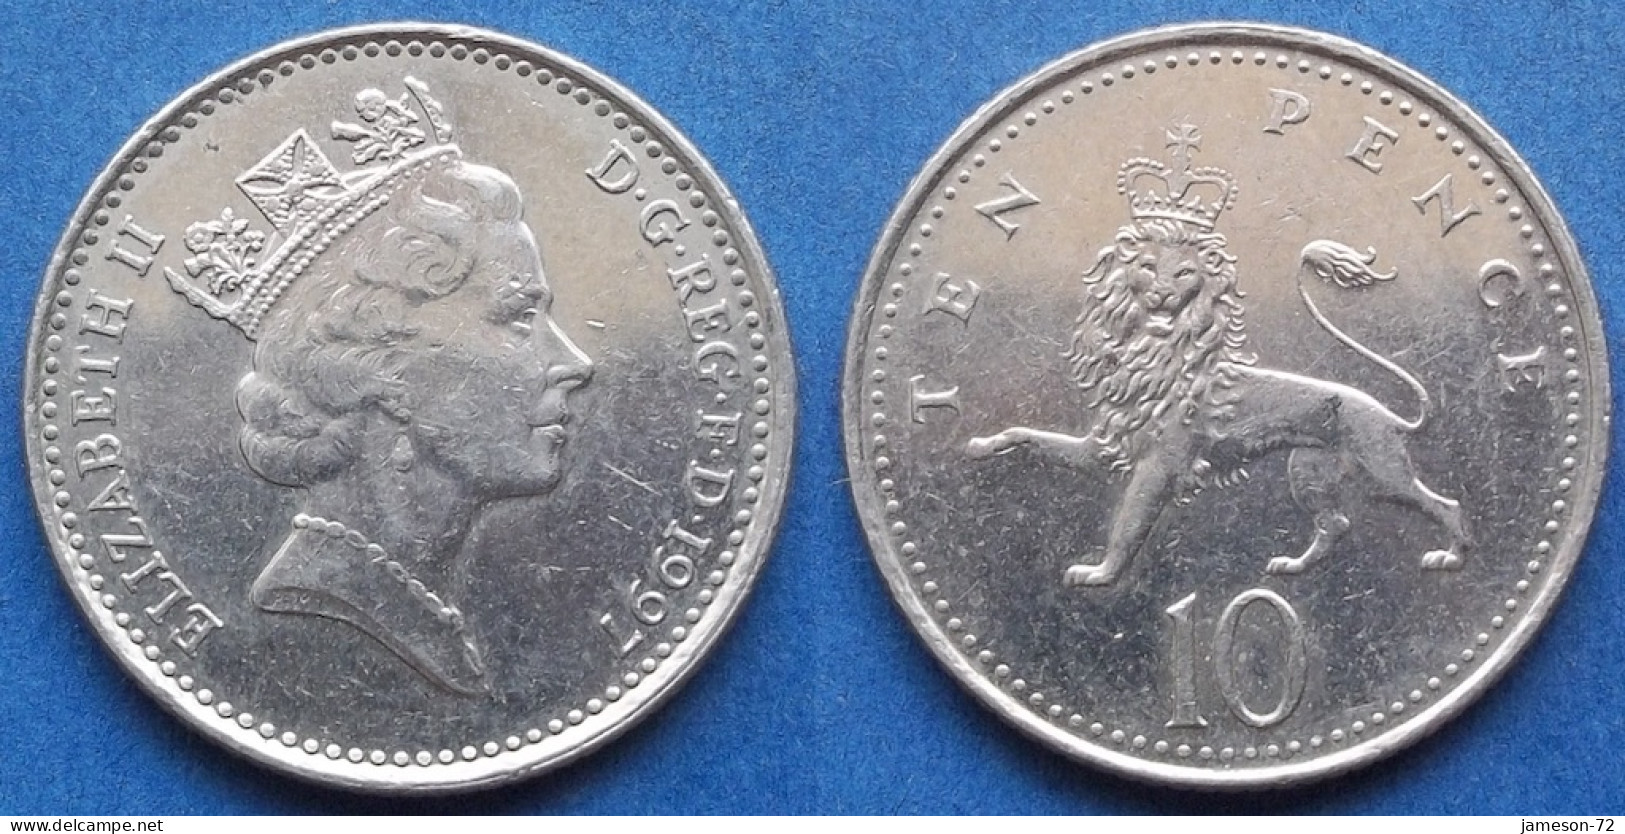 UK - 10 Pence 1997 "crowned Lion" KM# 938b Elizabeth II Decimal Coinage (1971-2022) - Edelweiss Coins - 10 Pence & 10 New Pence